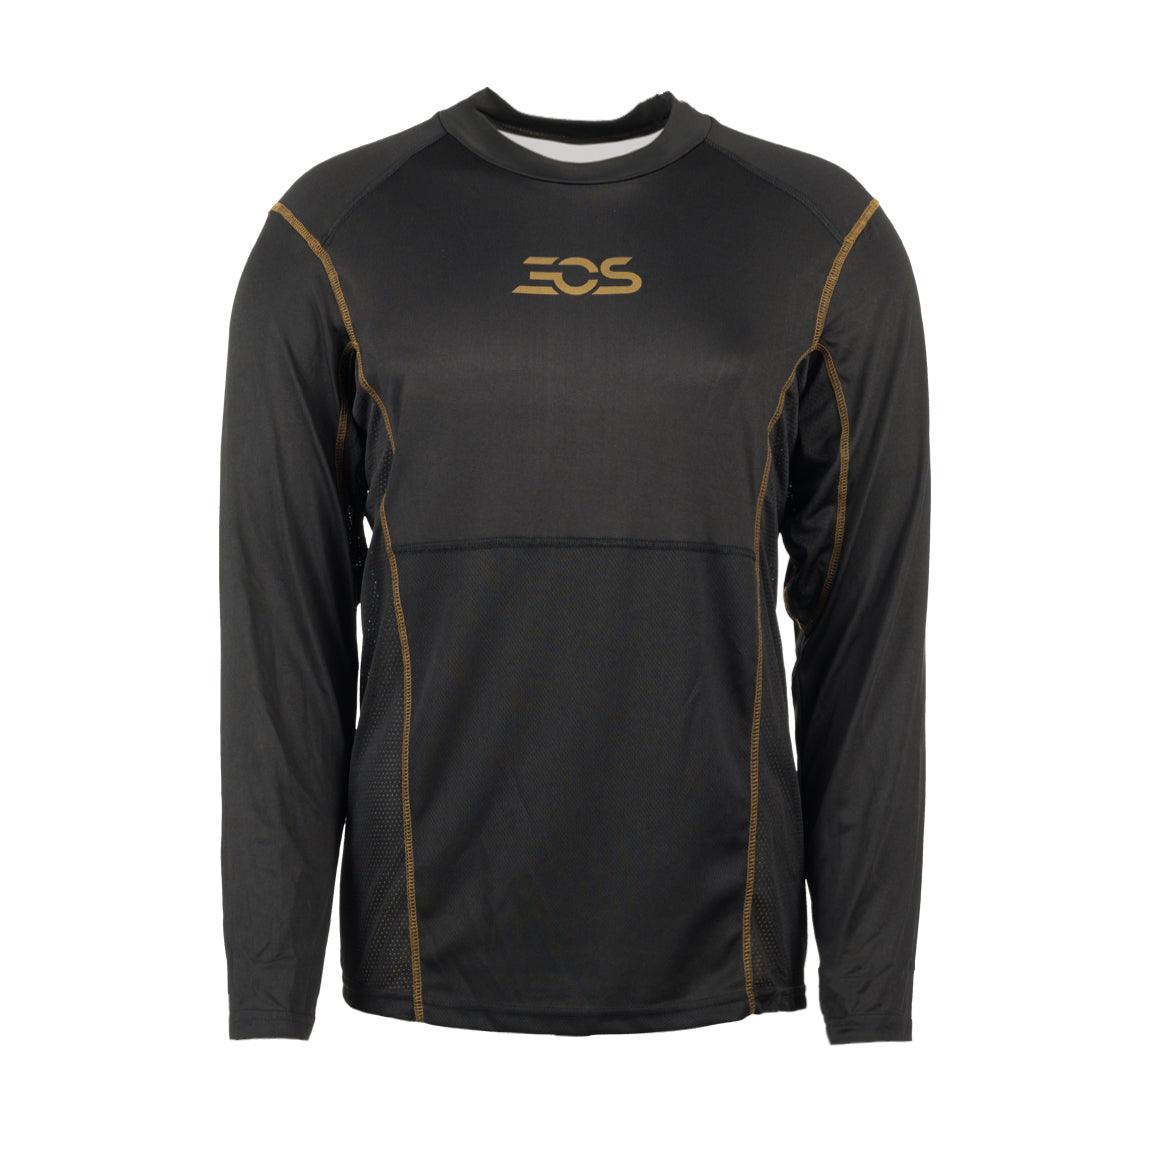 EOS 50 Men's Baselayer Fitted Shirt - Senior - Sports Excellence